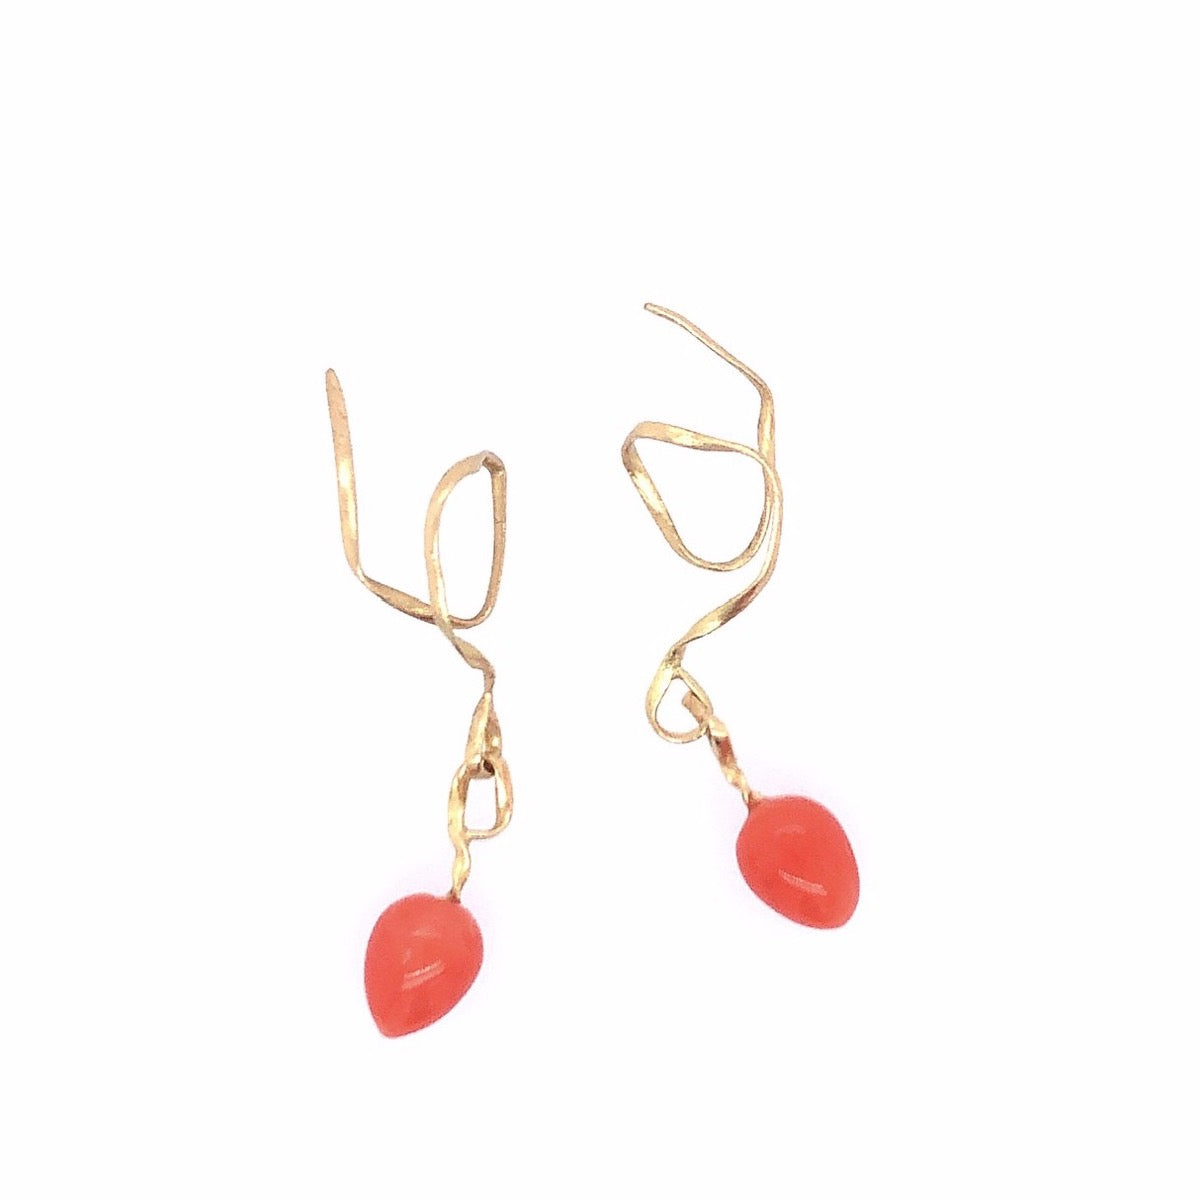 Flair earrings 18kt. and legal Corals